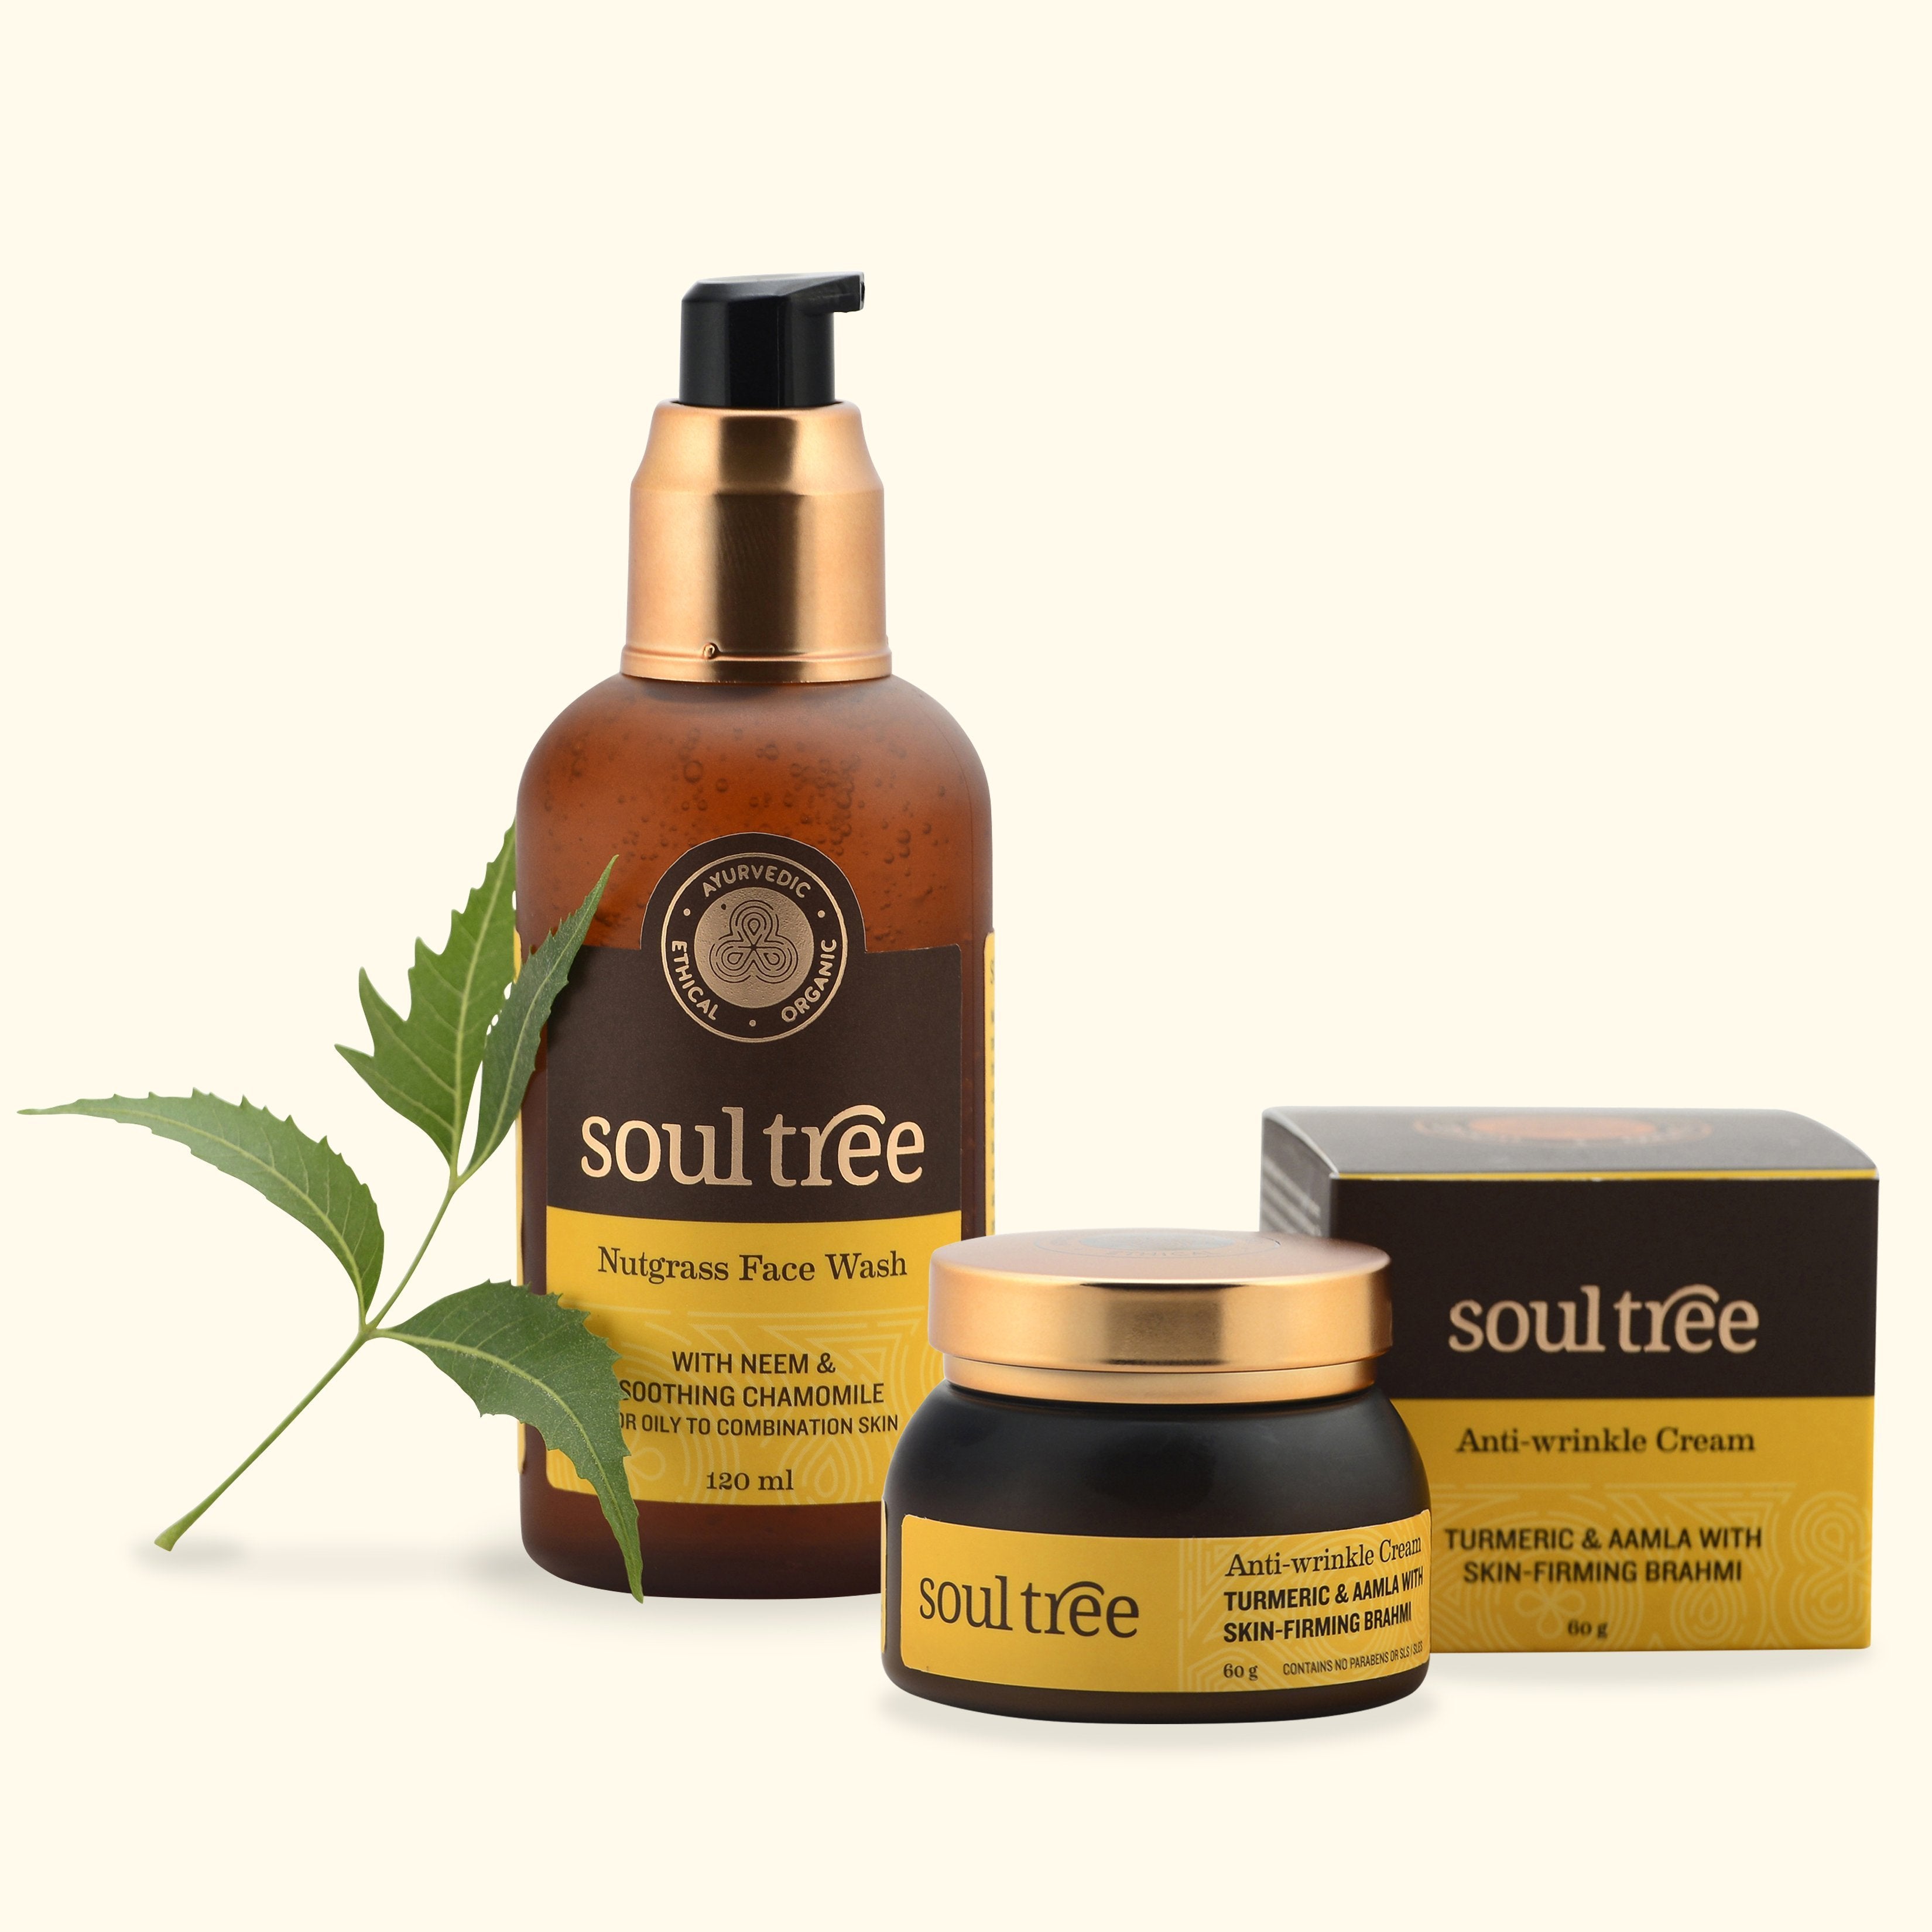 Nutgrass Face Wash & Anti-Wrinkle Cream Set - SoulTree